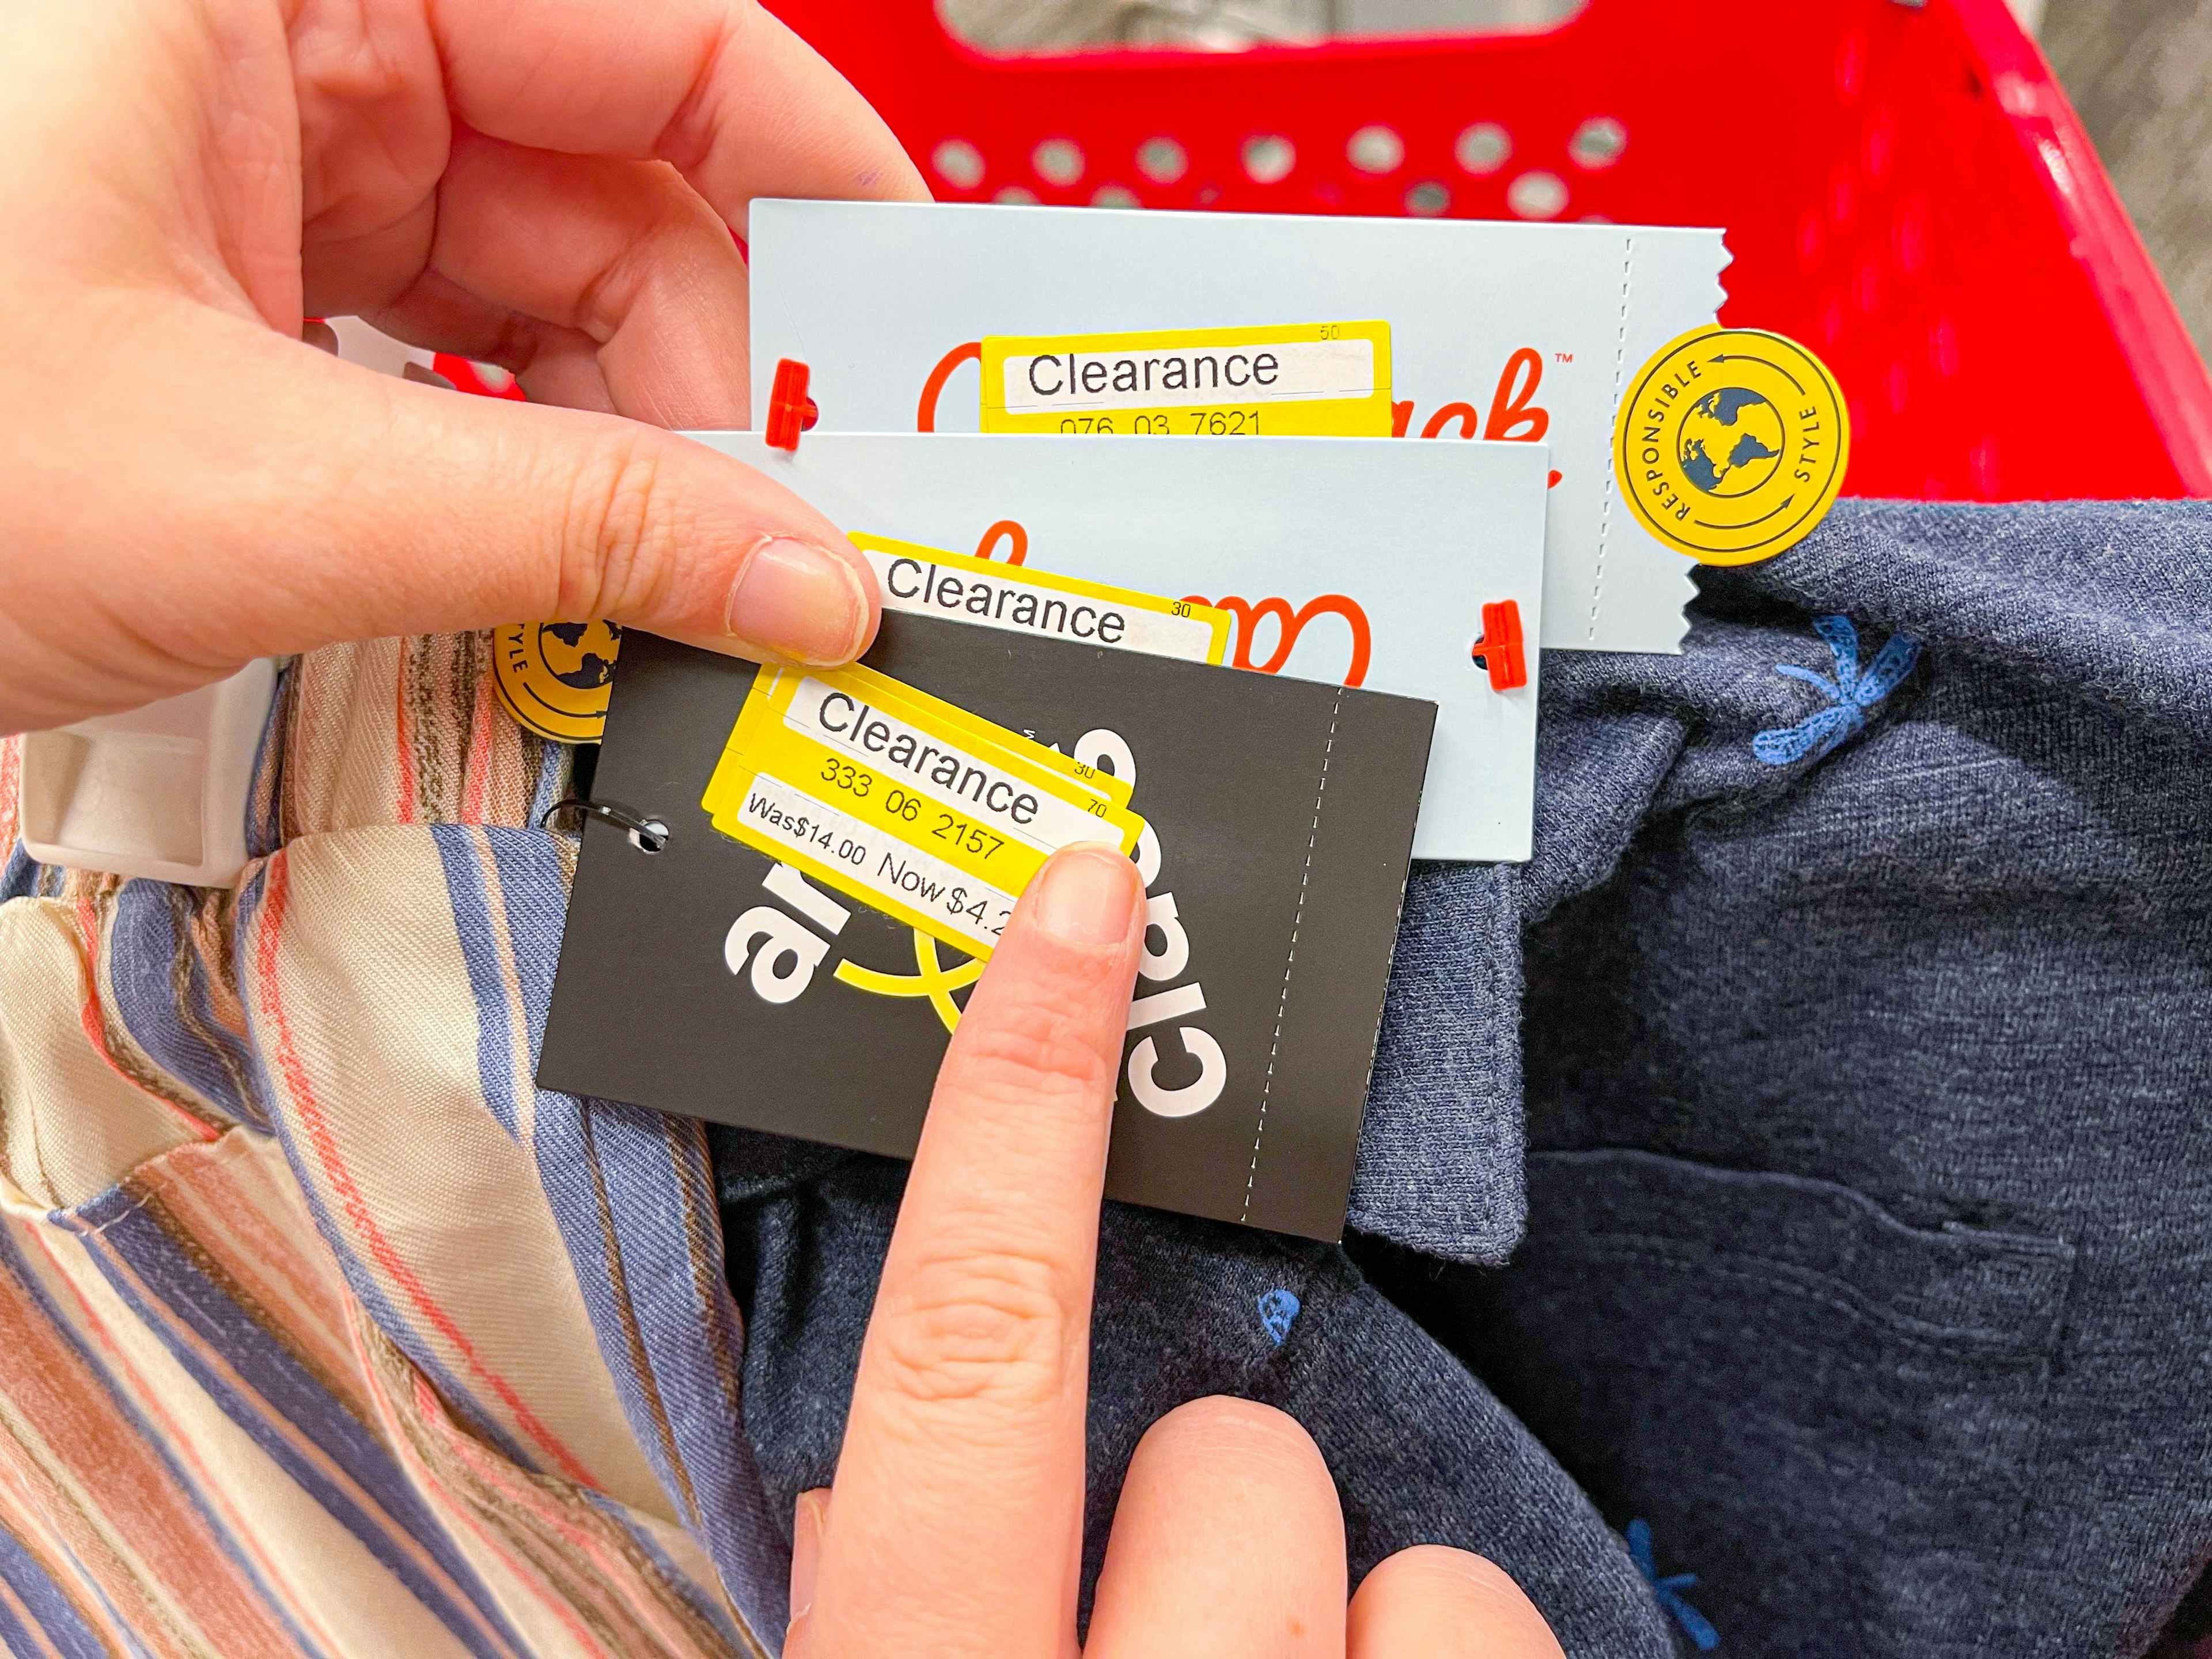 A person's hands holding some Target clearance clothing and pointing to the clearance sticker on one of the tags.